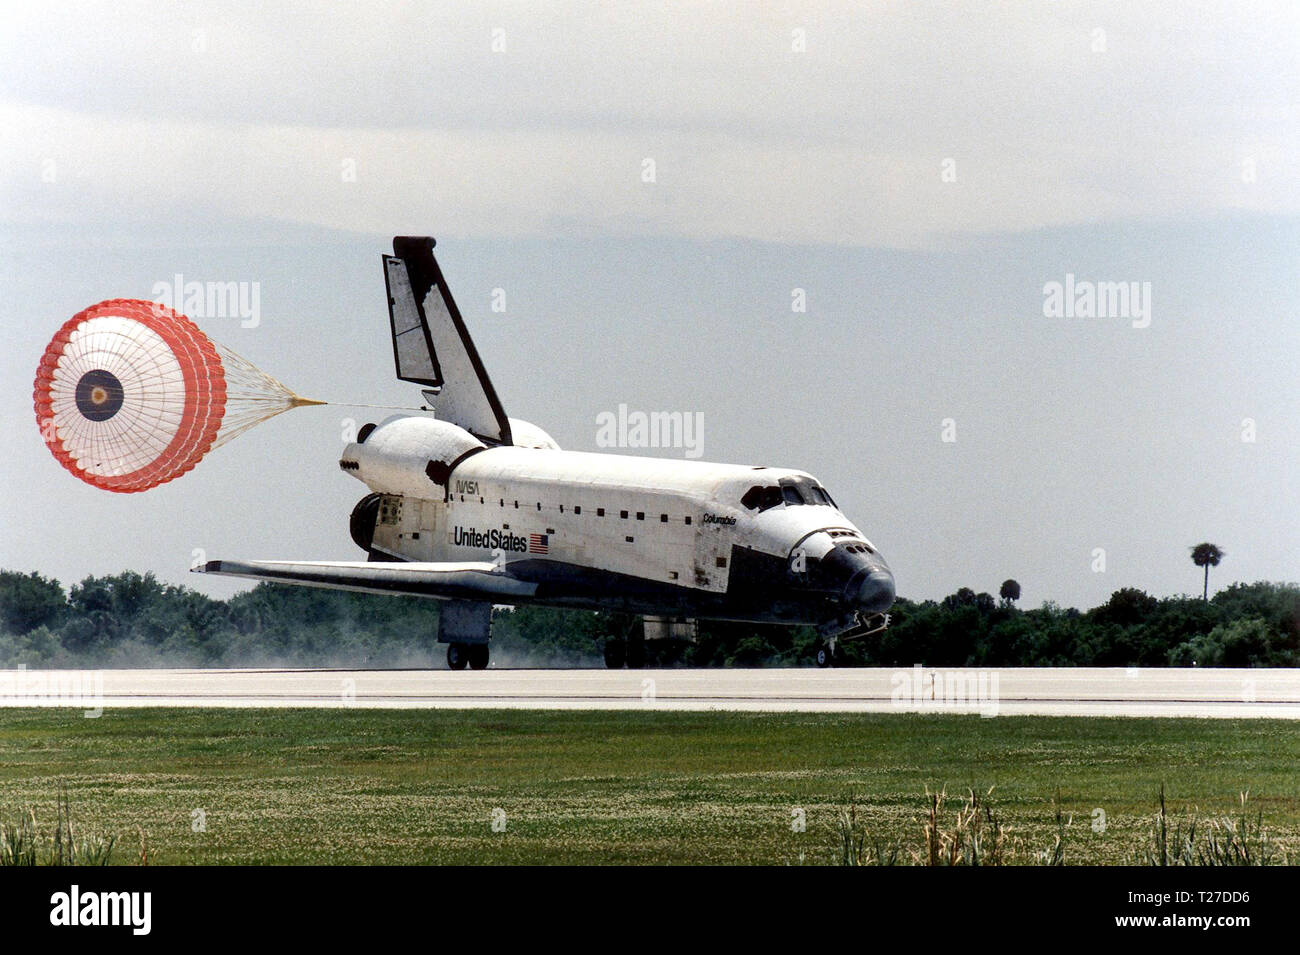 KENNEDY SPACE CENTER, FLA. -- With drag chute deployed, the Space Shuttle Columbia hurtles down Runway 33 at KSCþs Shuttle Landing Facility to conclude the Microgravity Science Laboratory-1 (MSL-1) mission. With main gear touchdown at 2:33:11 p.m. EDT, April 8, the STS-83 mission duration was 3 days, 23 hours, 12 minutes. Stock Photo